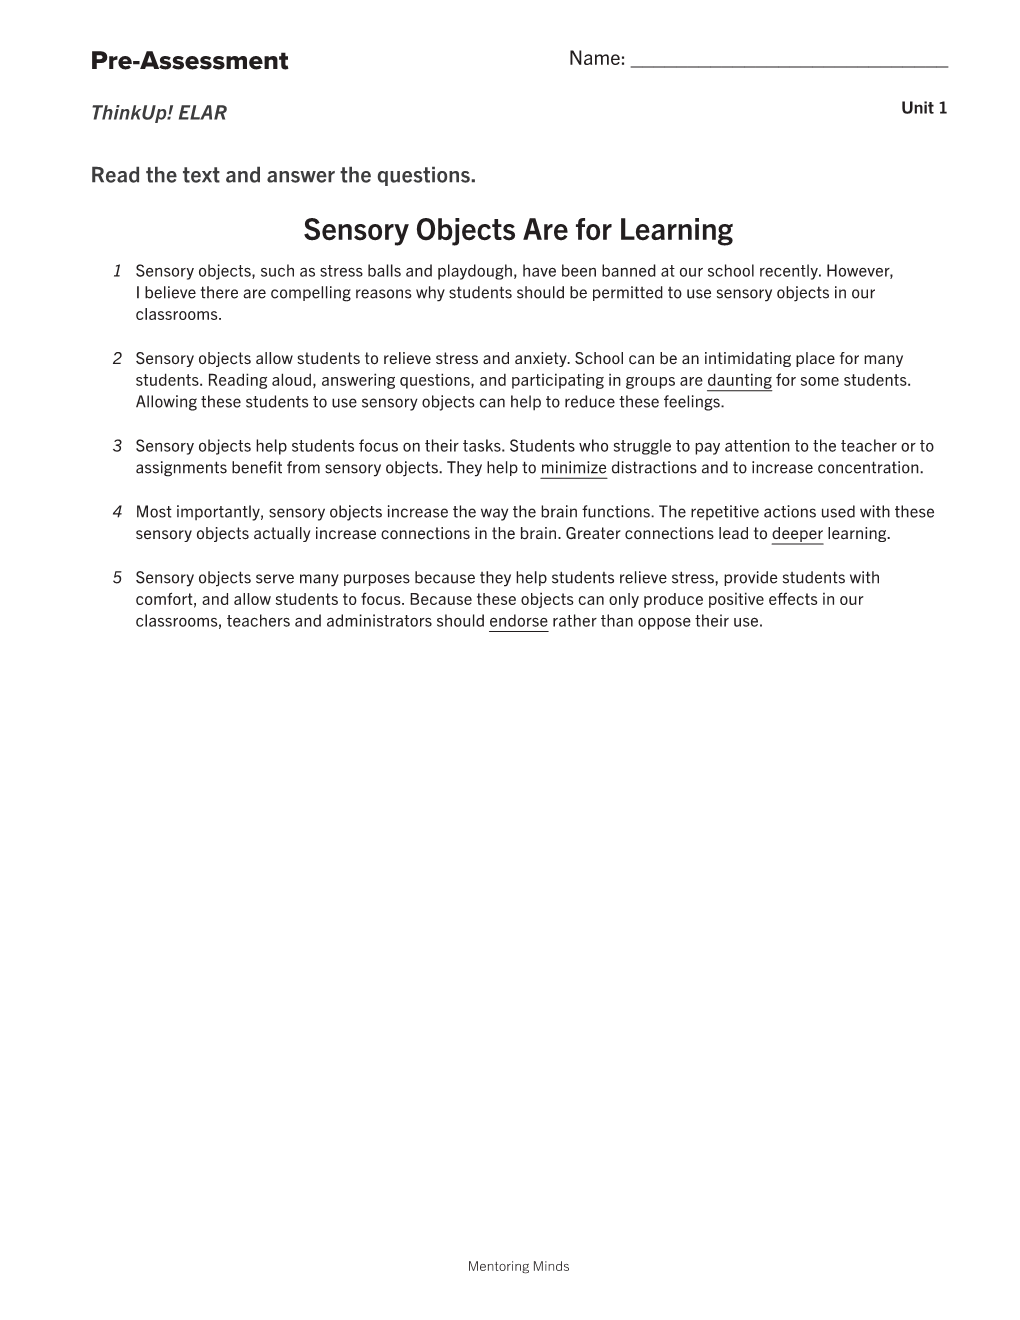 Sensory Objects Are for Learning